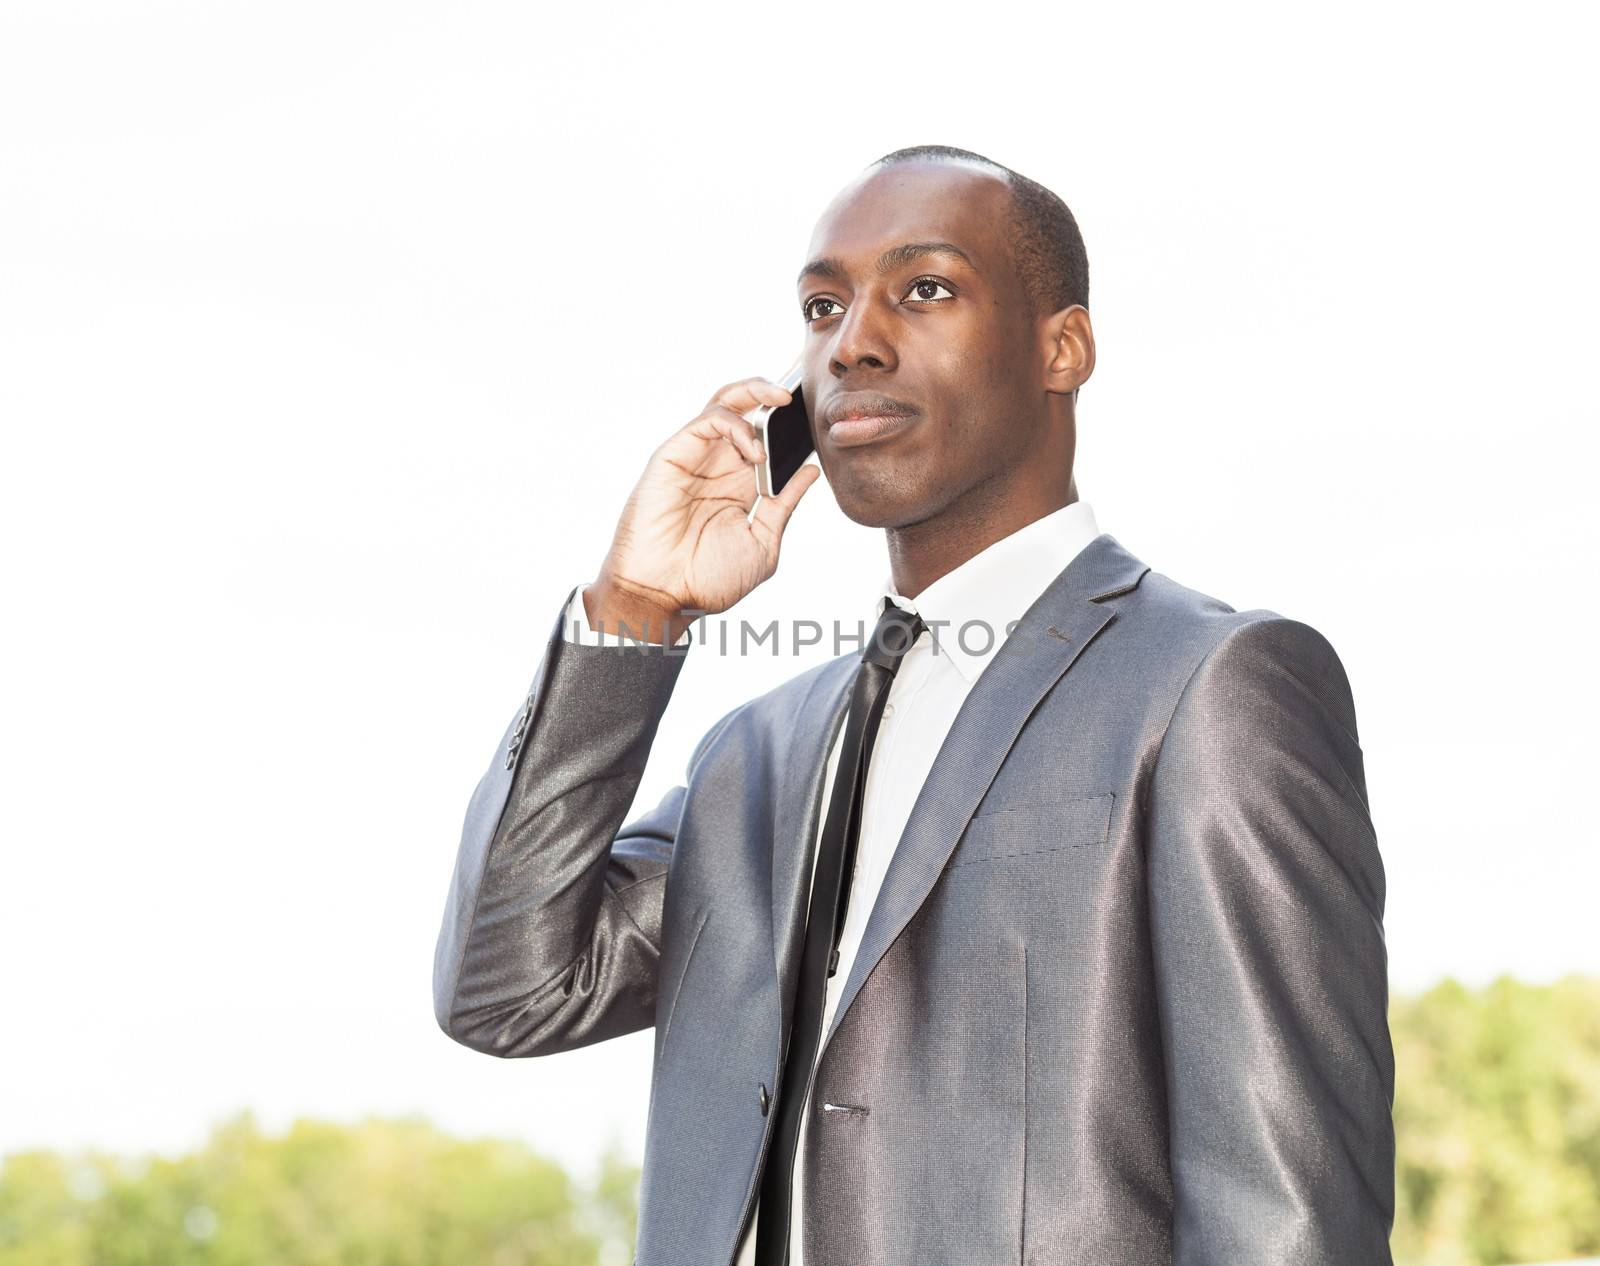 Portrait of a businessman on the phone, outdoor